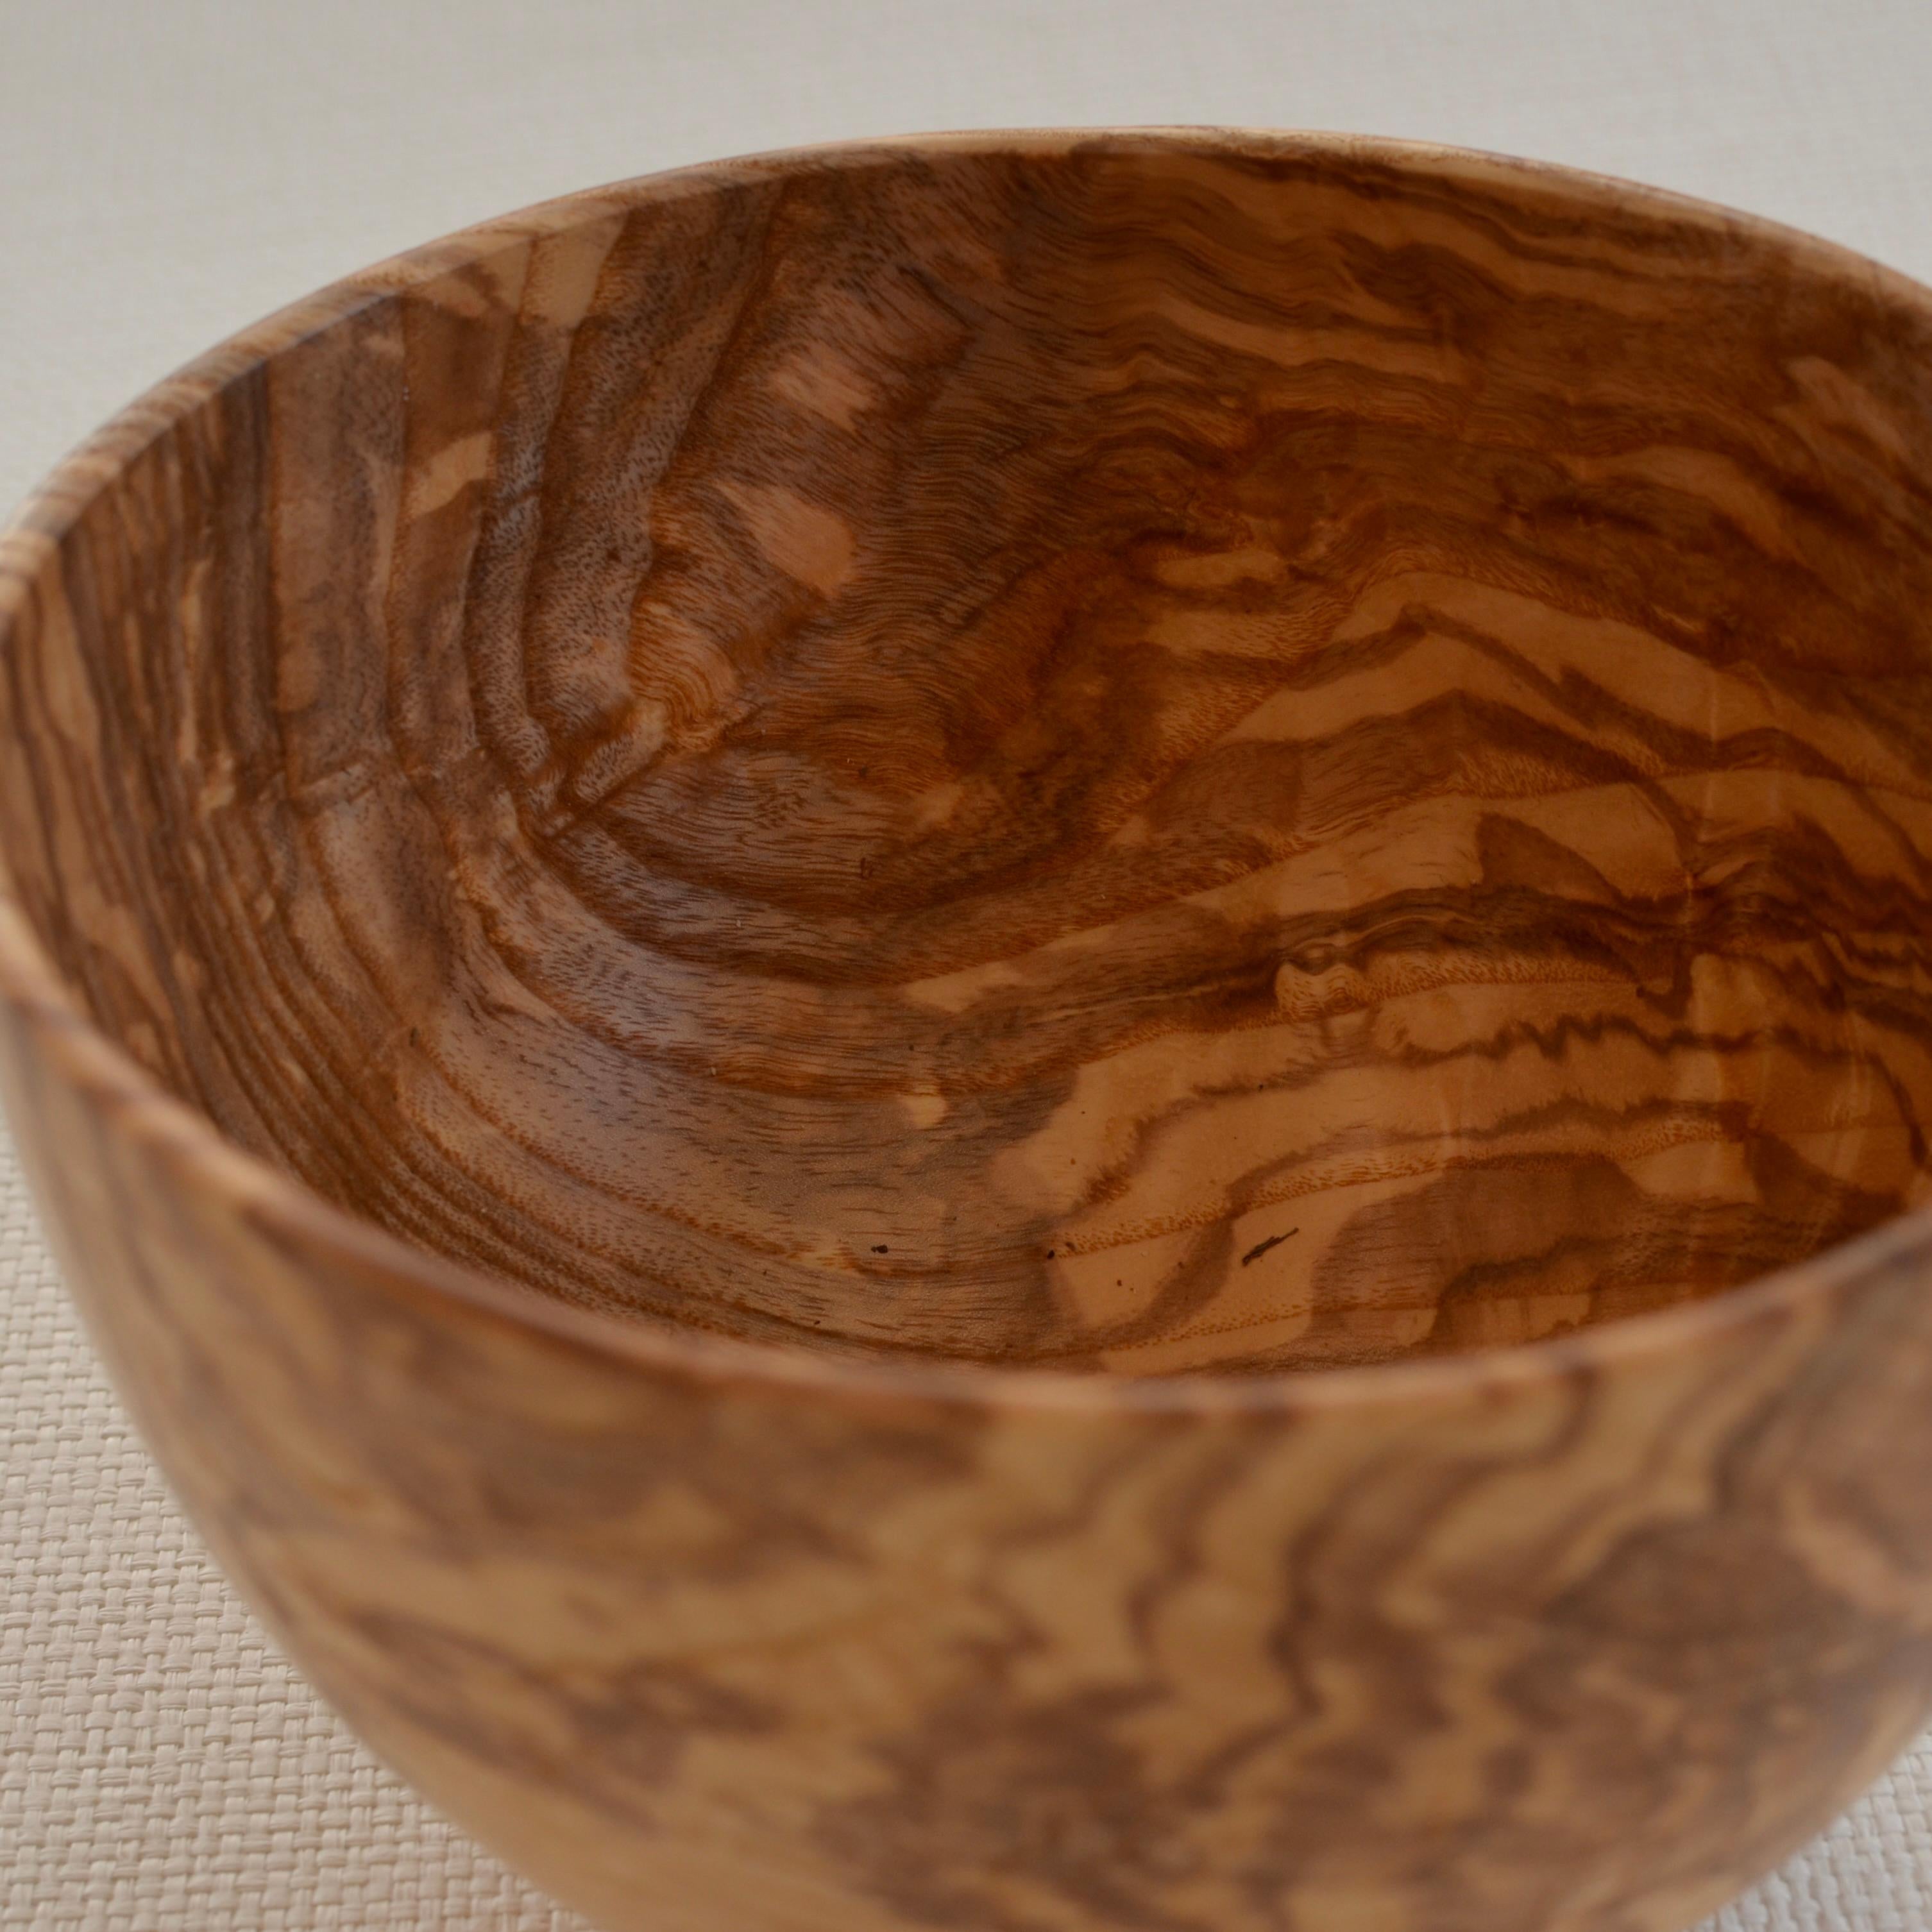 Hand-carved, oiled, 100-year-old Ash wood bowl with natural grain. Created using wood only from fallen Ash trees. One of a kind.